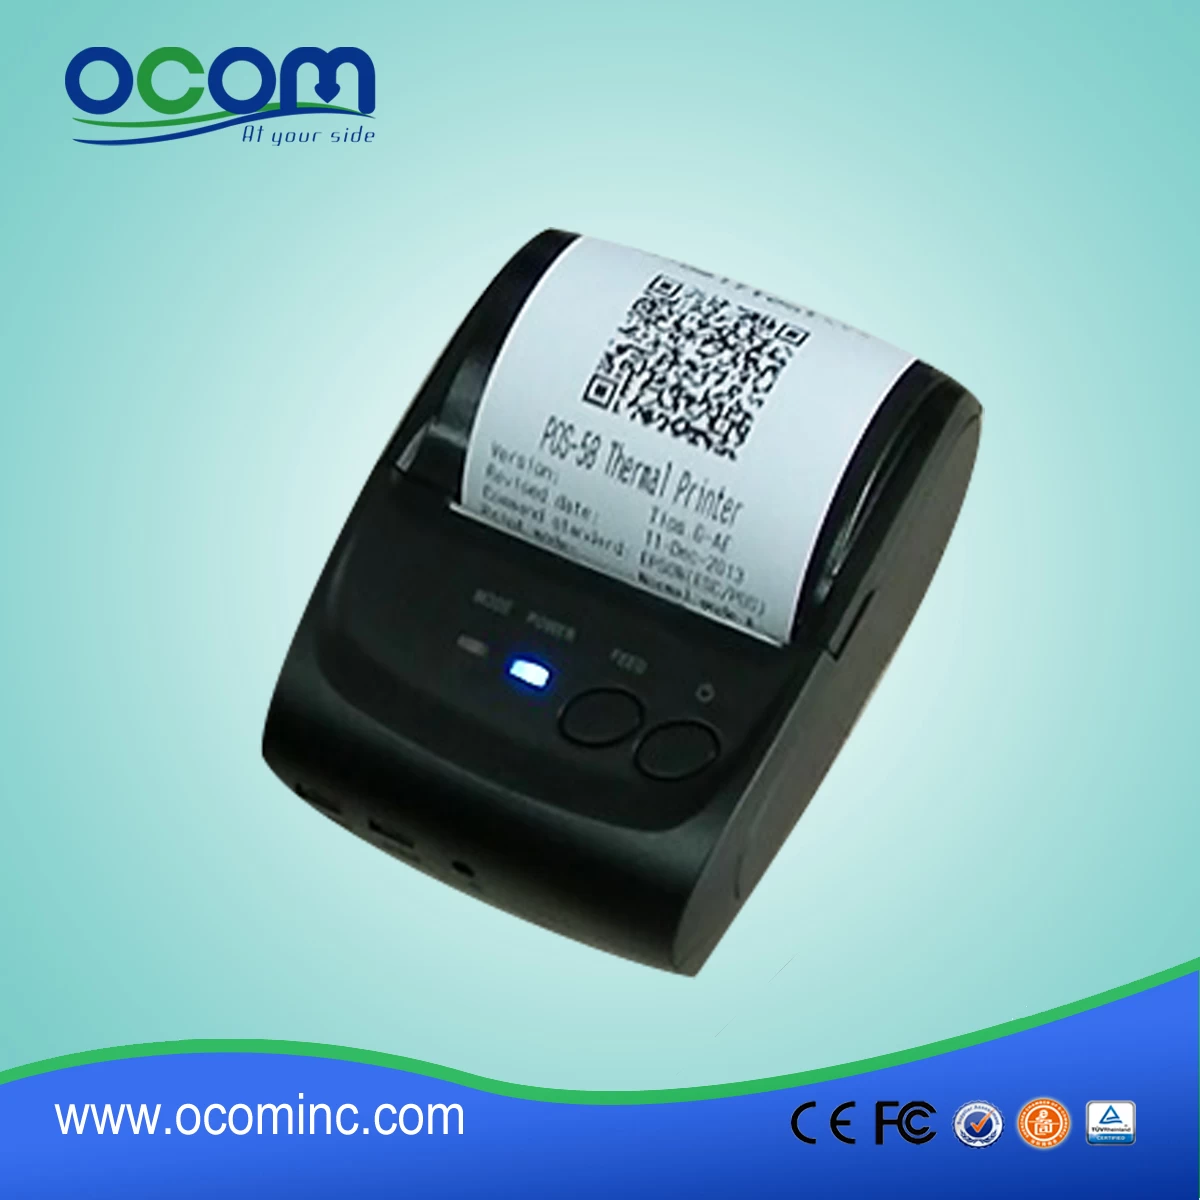 OCPP-M05: 58mm Android & IOS Portable Bluetooth Thermal Printer with Android SDK